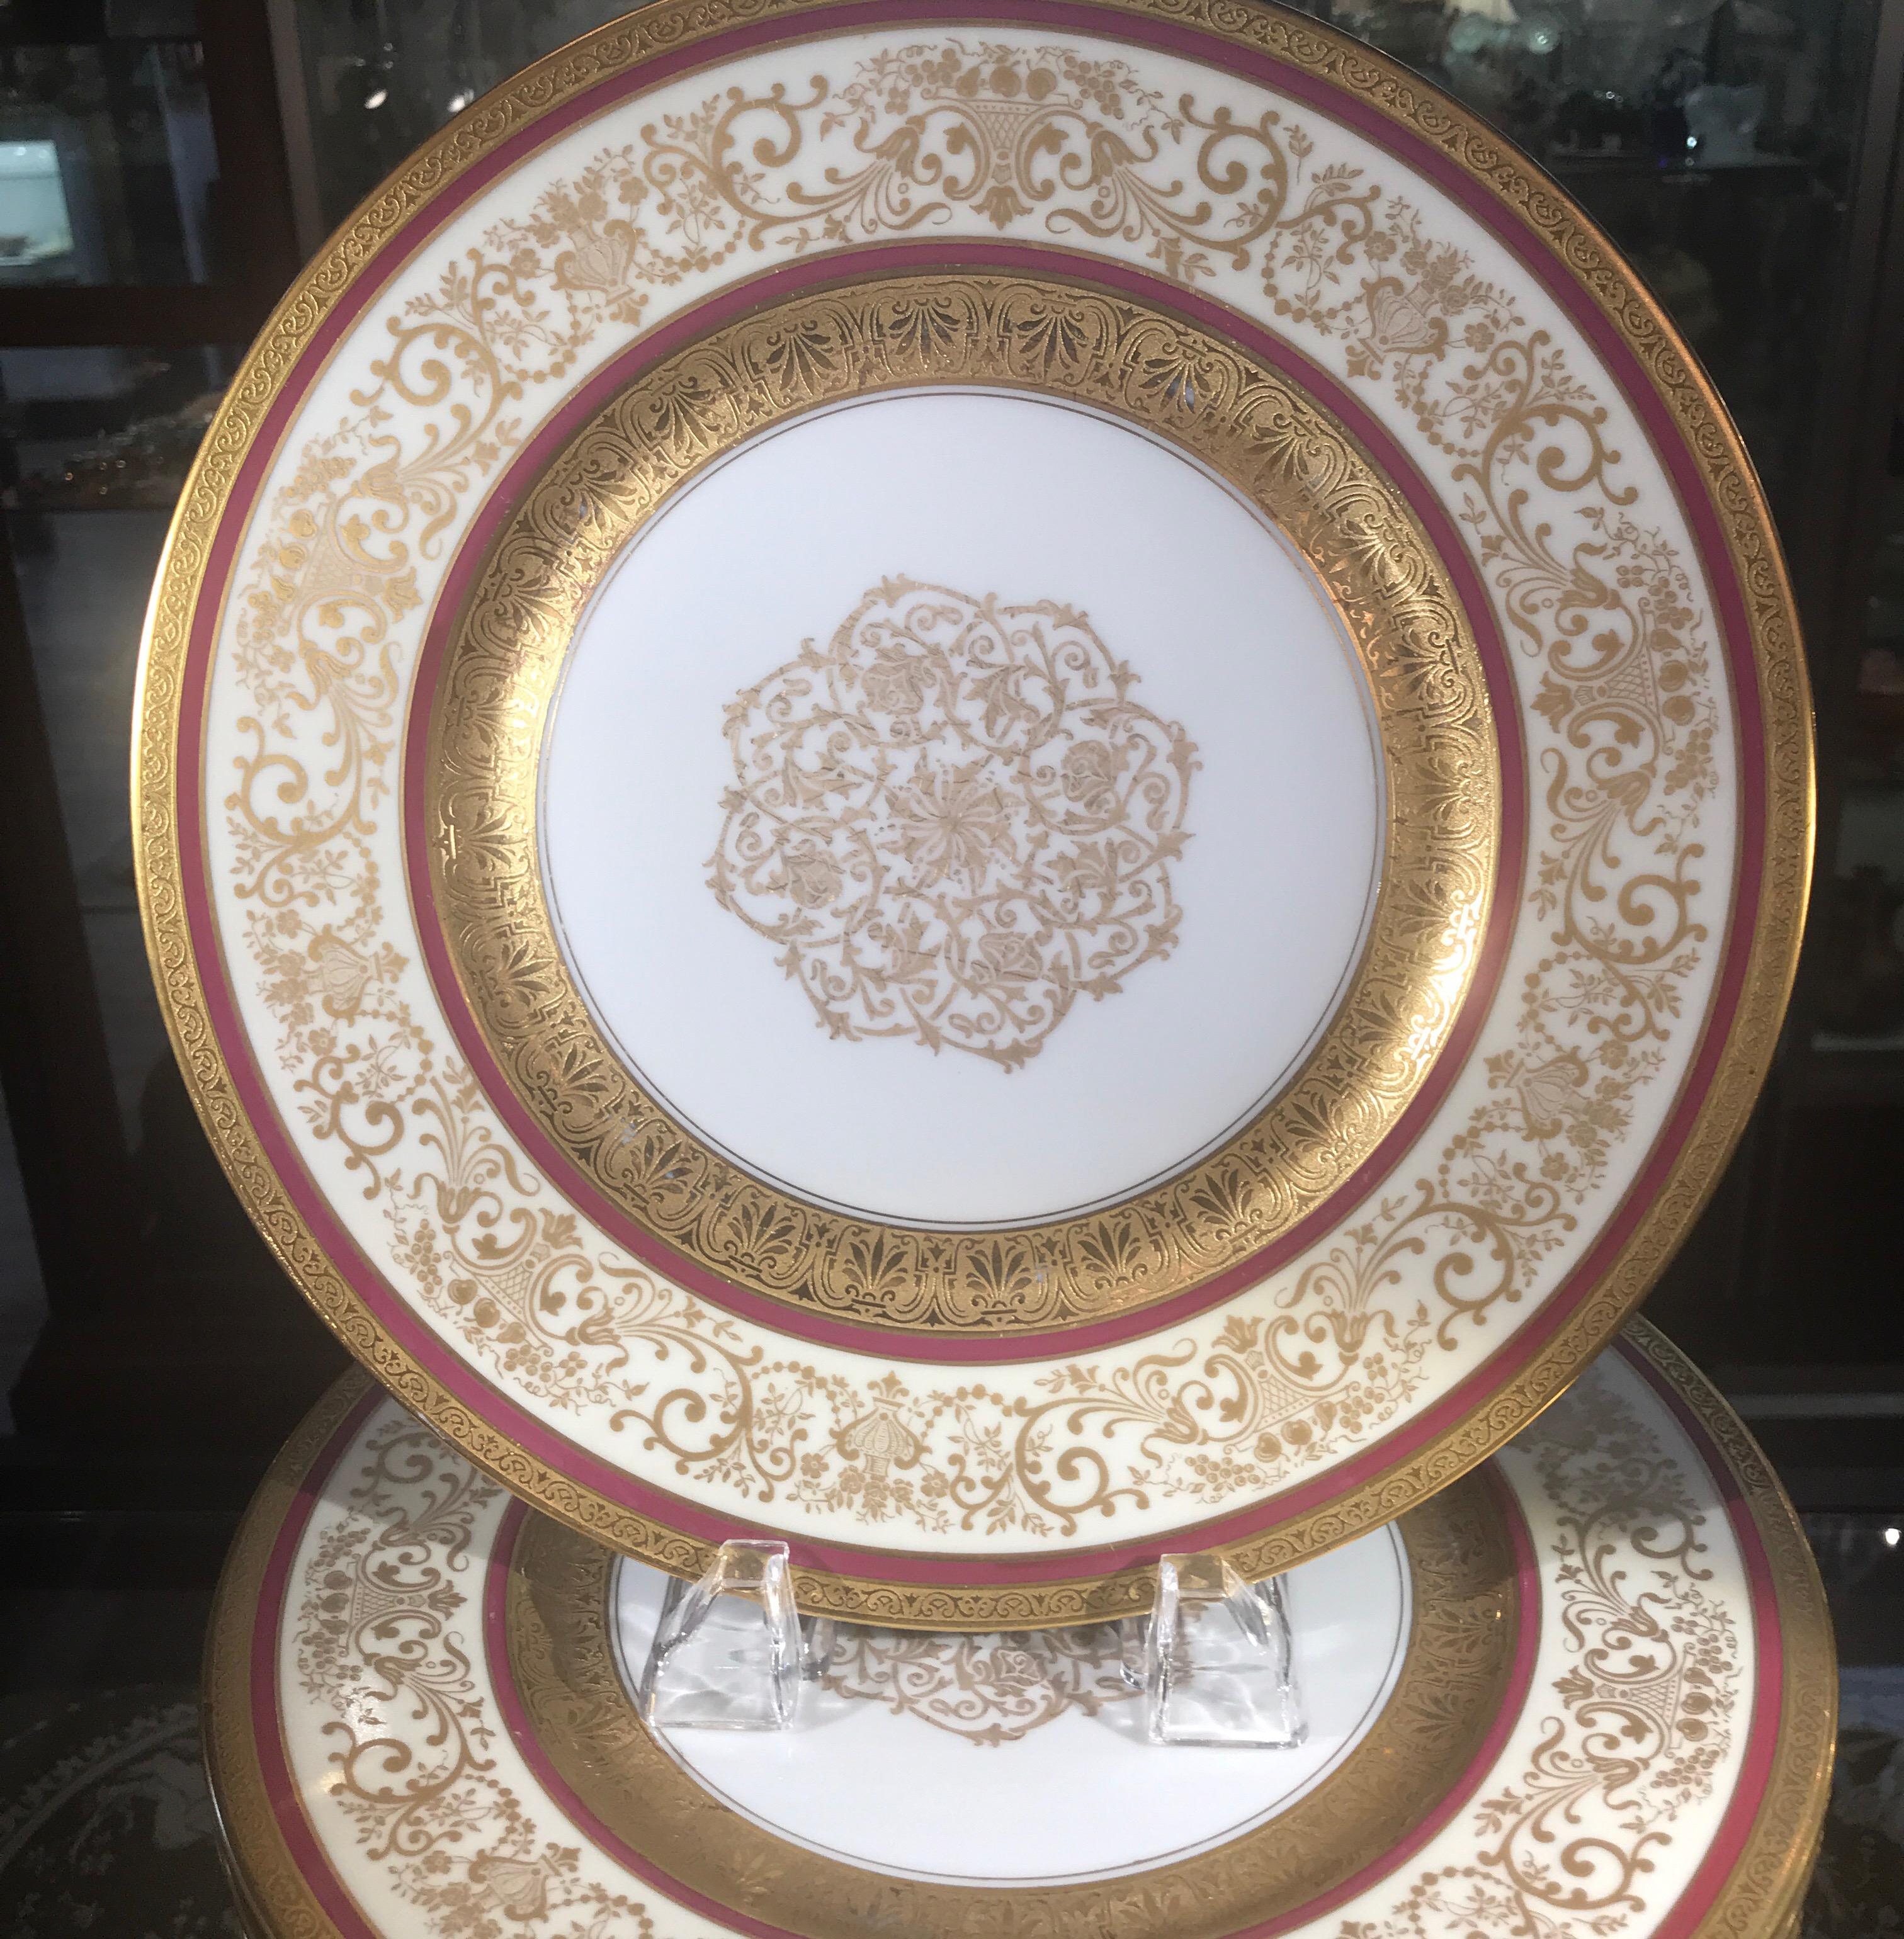 Elegant set of 12 elaborate gold banded service plates with cranberry trim. The gold encrusted borders with two thin red cranberry rings with filigree gold medallion centers. Excellent condition.